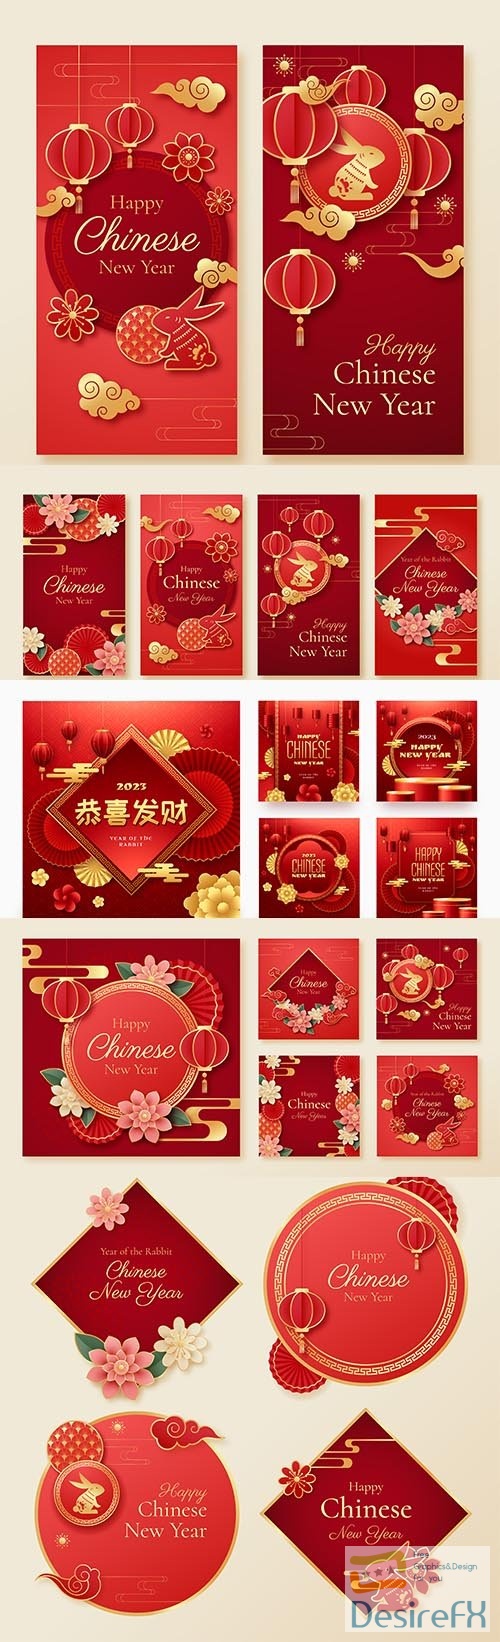 Chinese new year celebration instagram posts collection